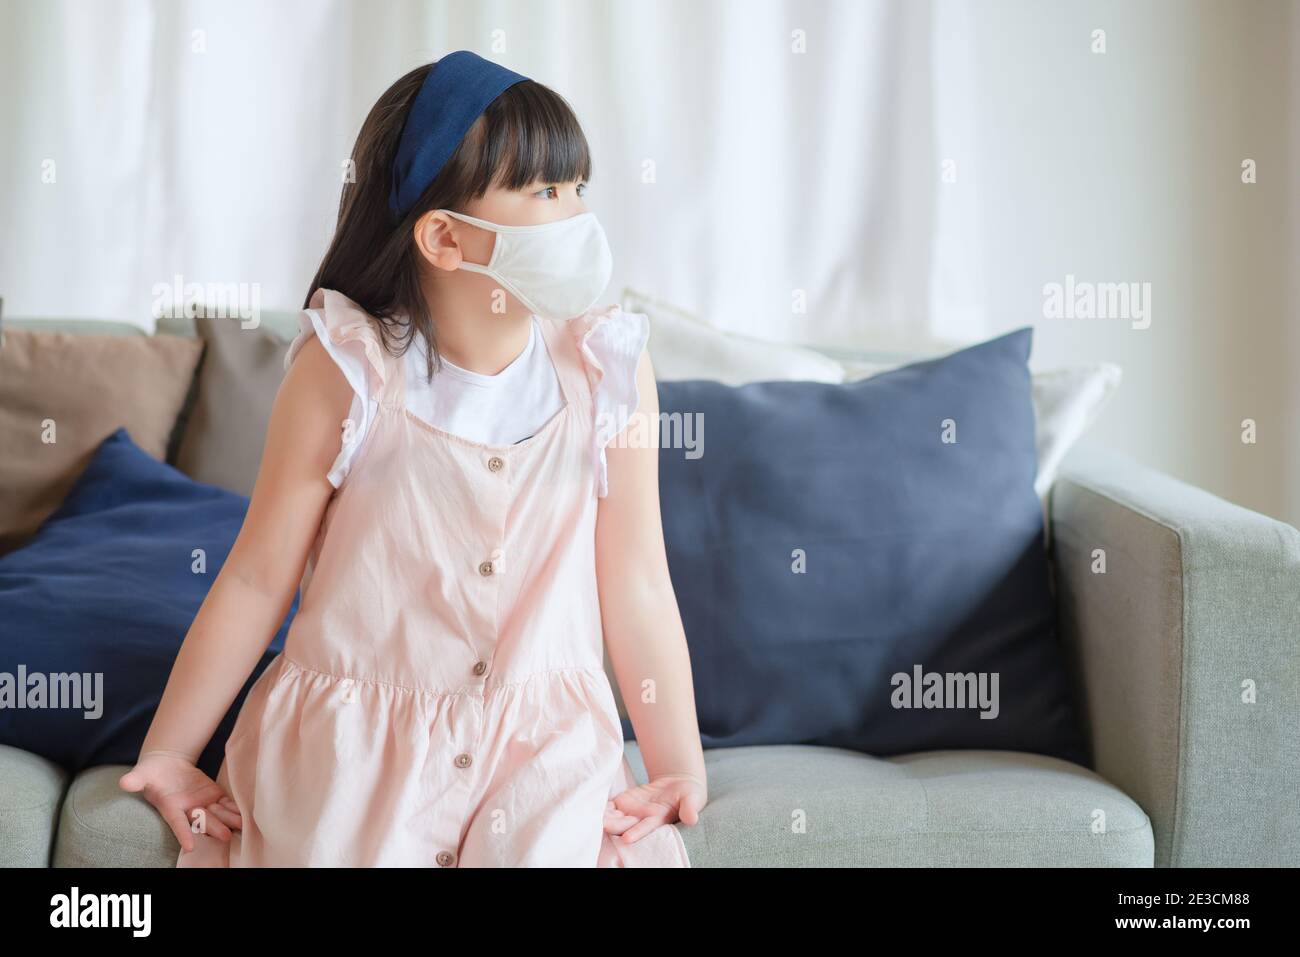 Asian little cute girl wearing hygienic face mask for prevent coronavirus or Covid-19 outbreak keep social distancing and stay at home. Stock Photo